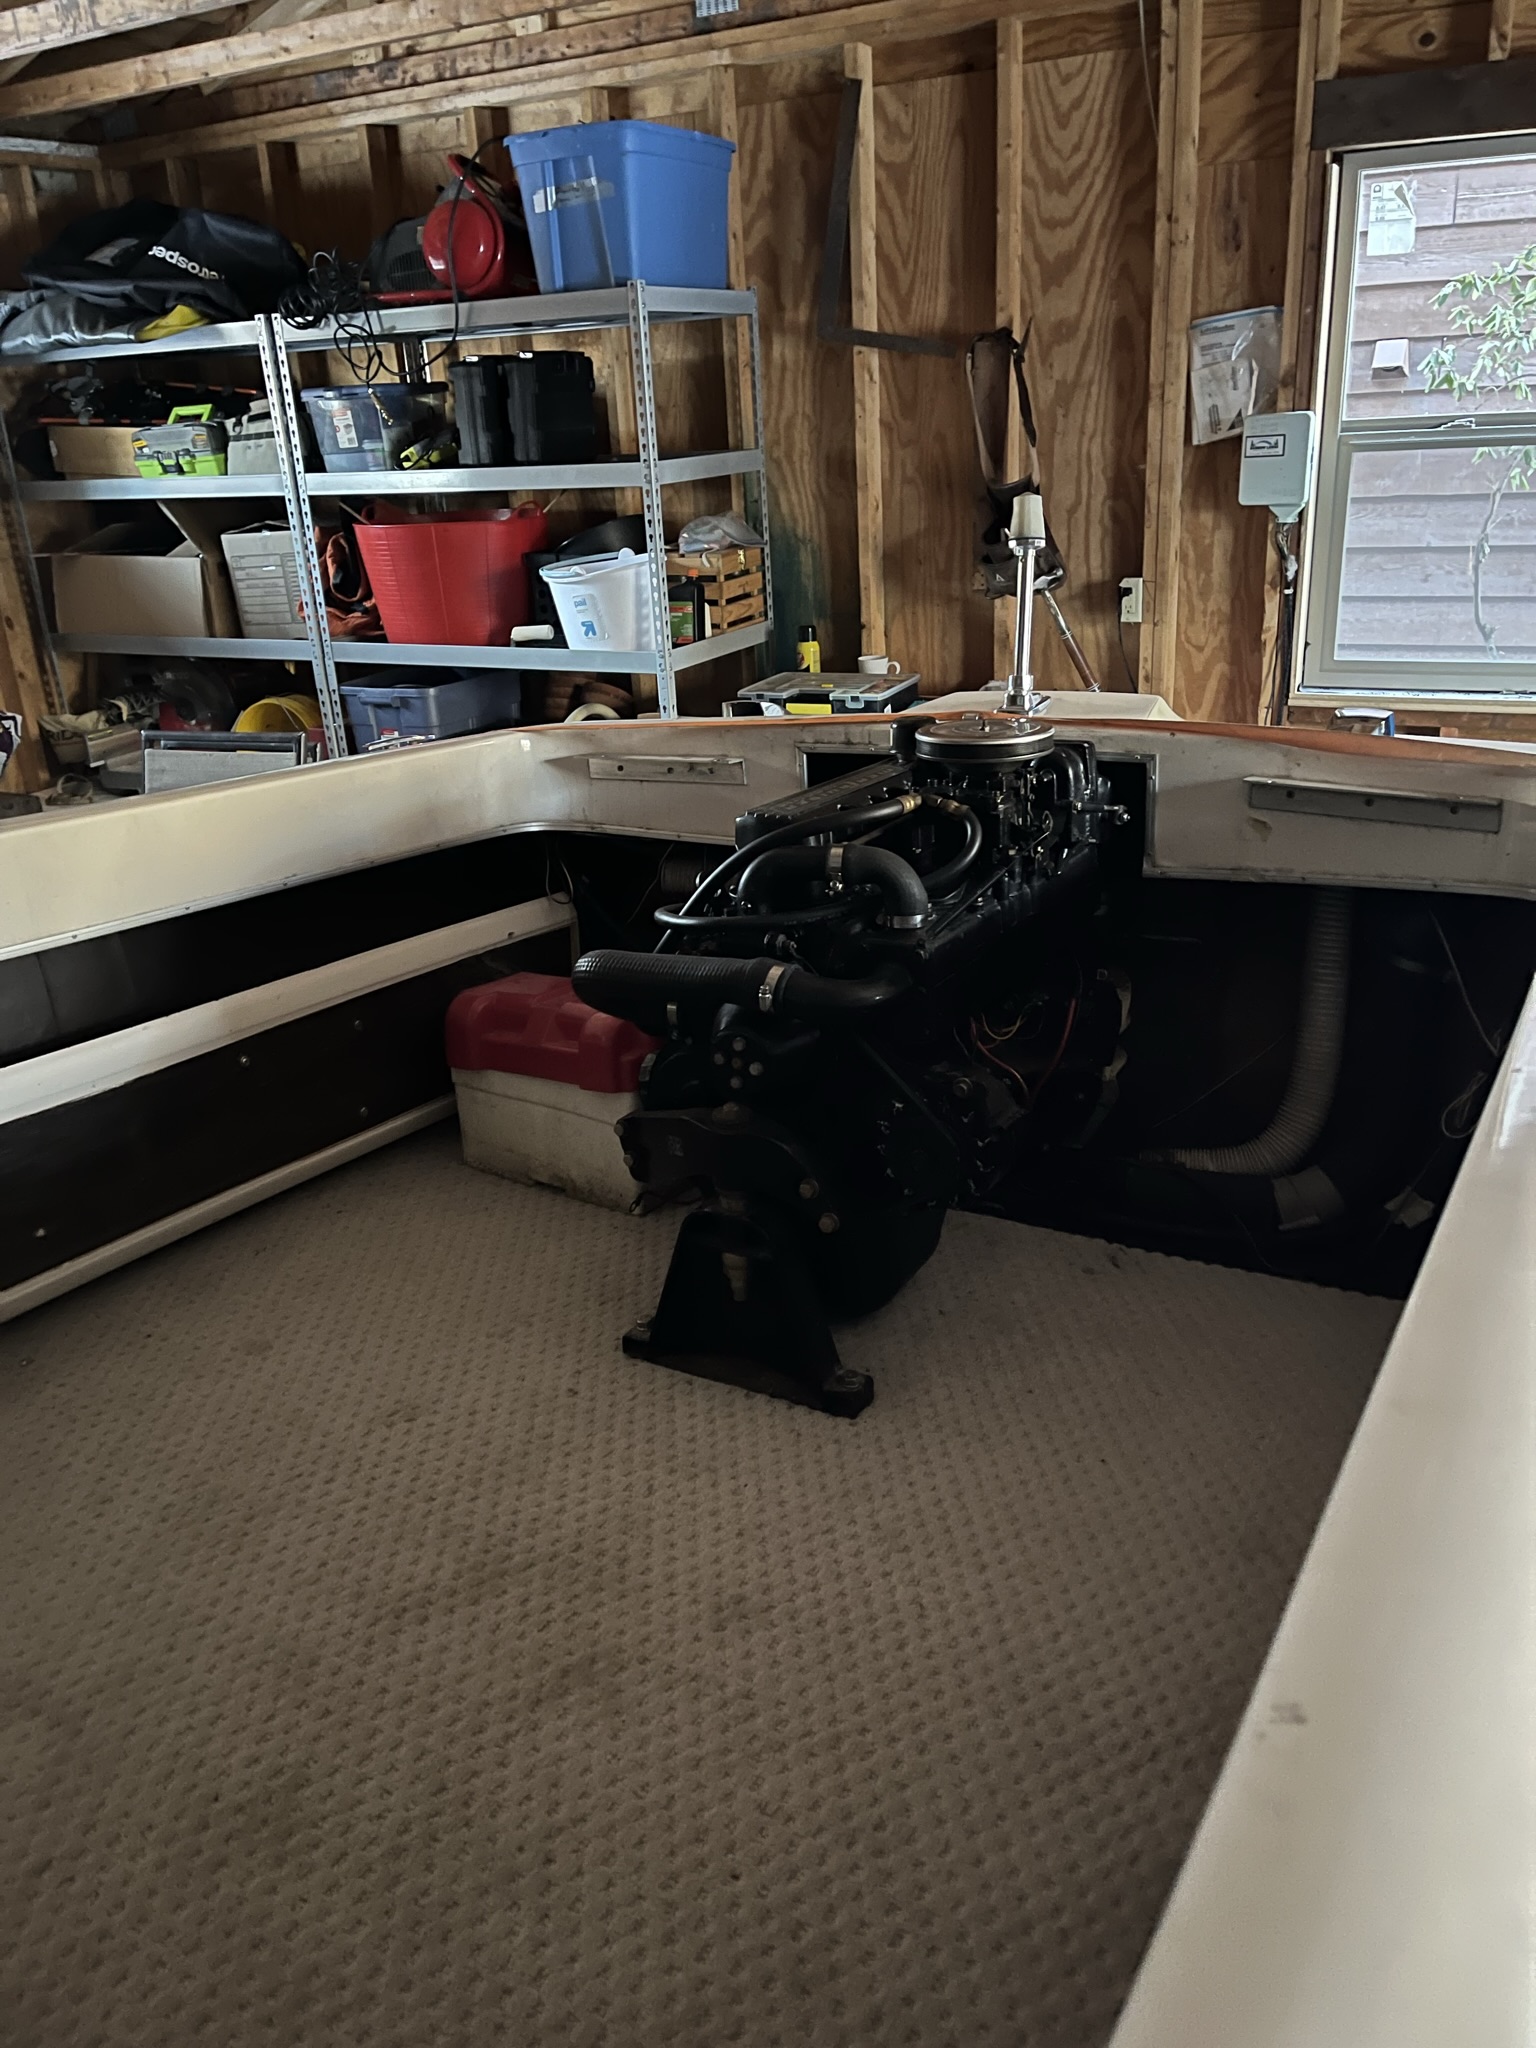 1966 17 foot Larson All American  Small boat for sale in Crosslake, MN - image 3 